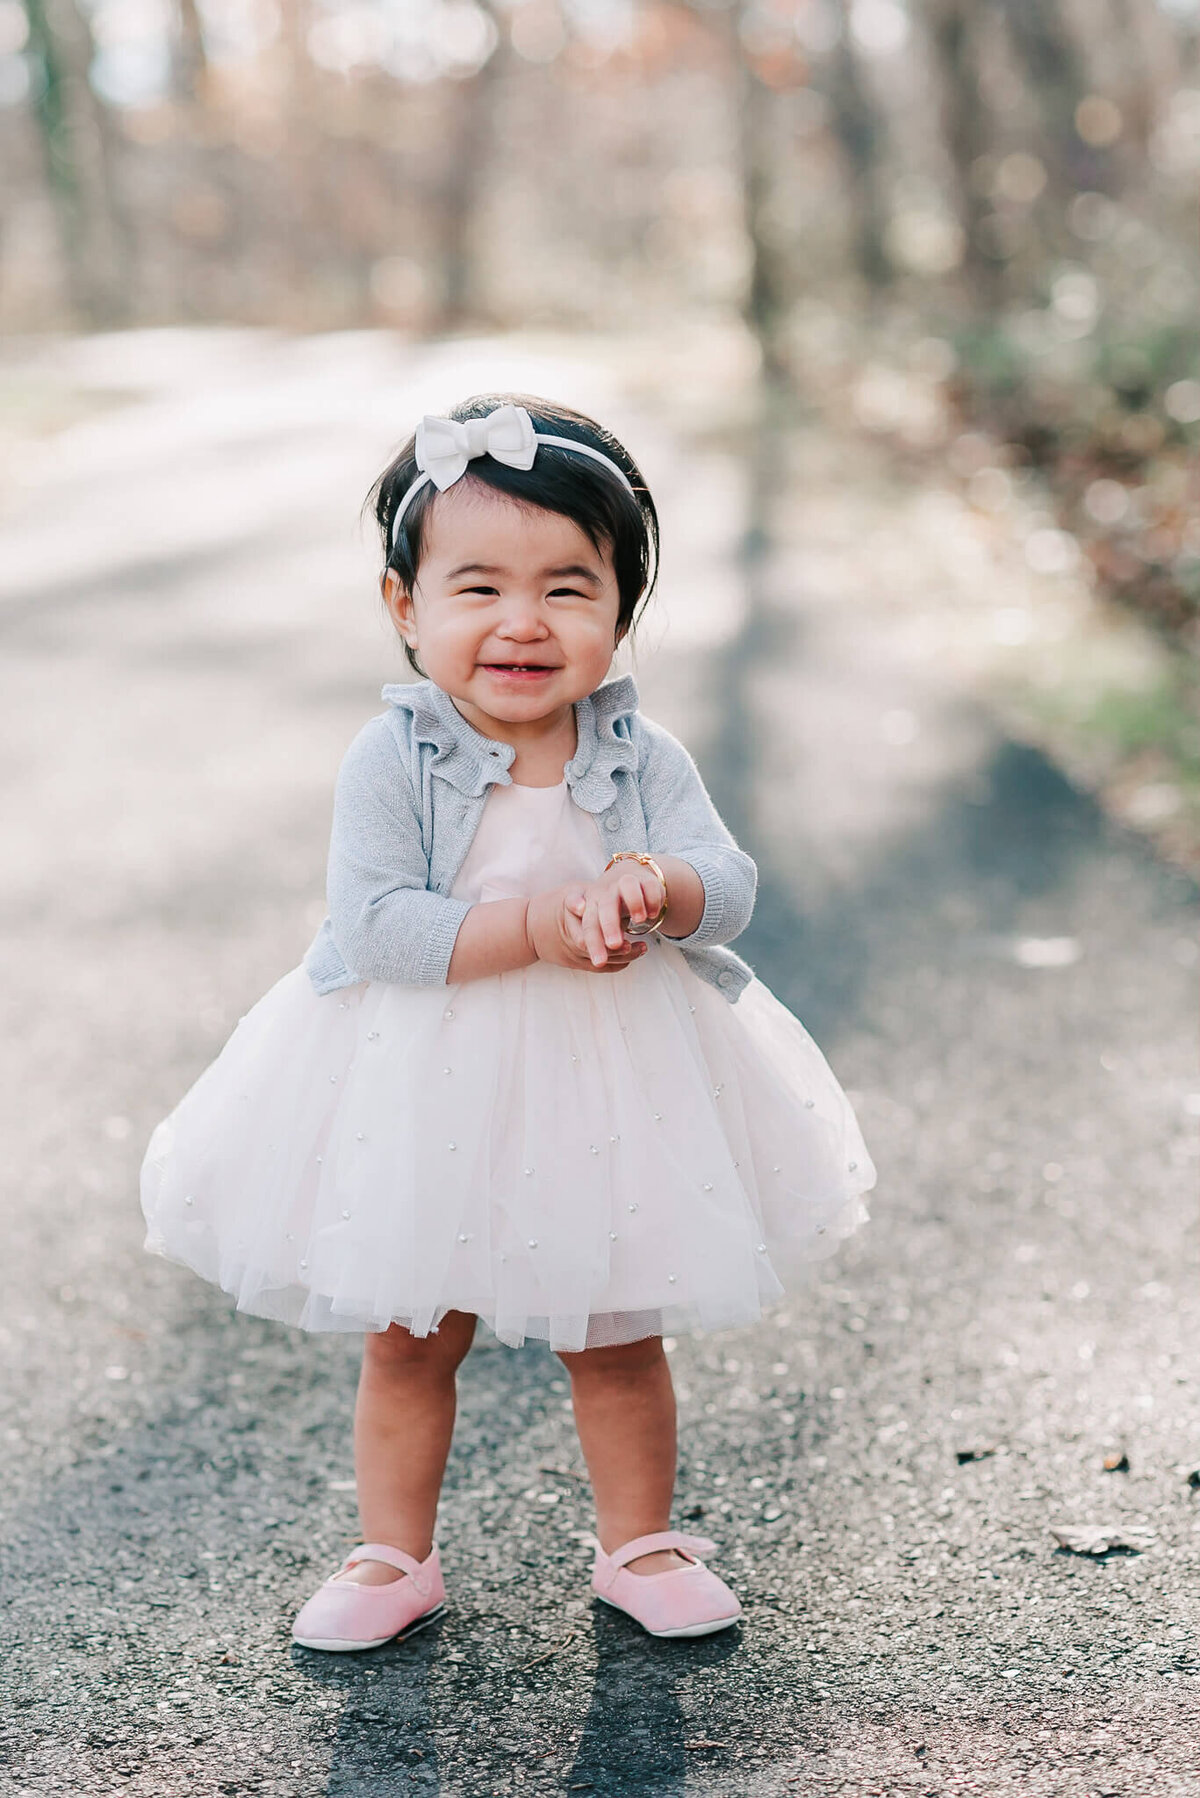 Sweetly smiling one year old girl wearing a pale pink tulle dress and grey cardigan